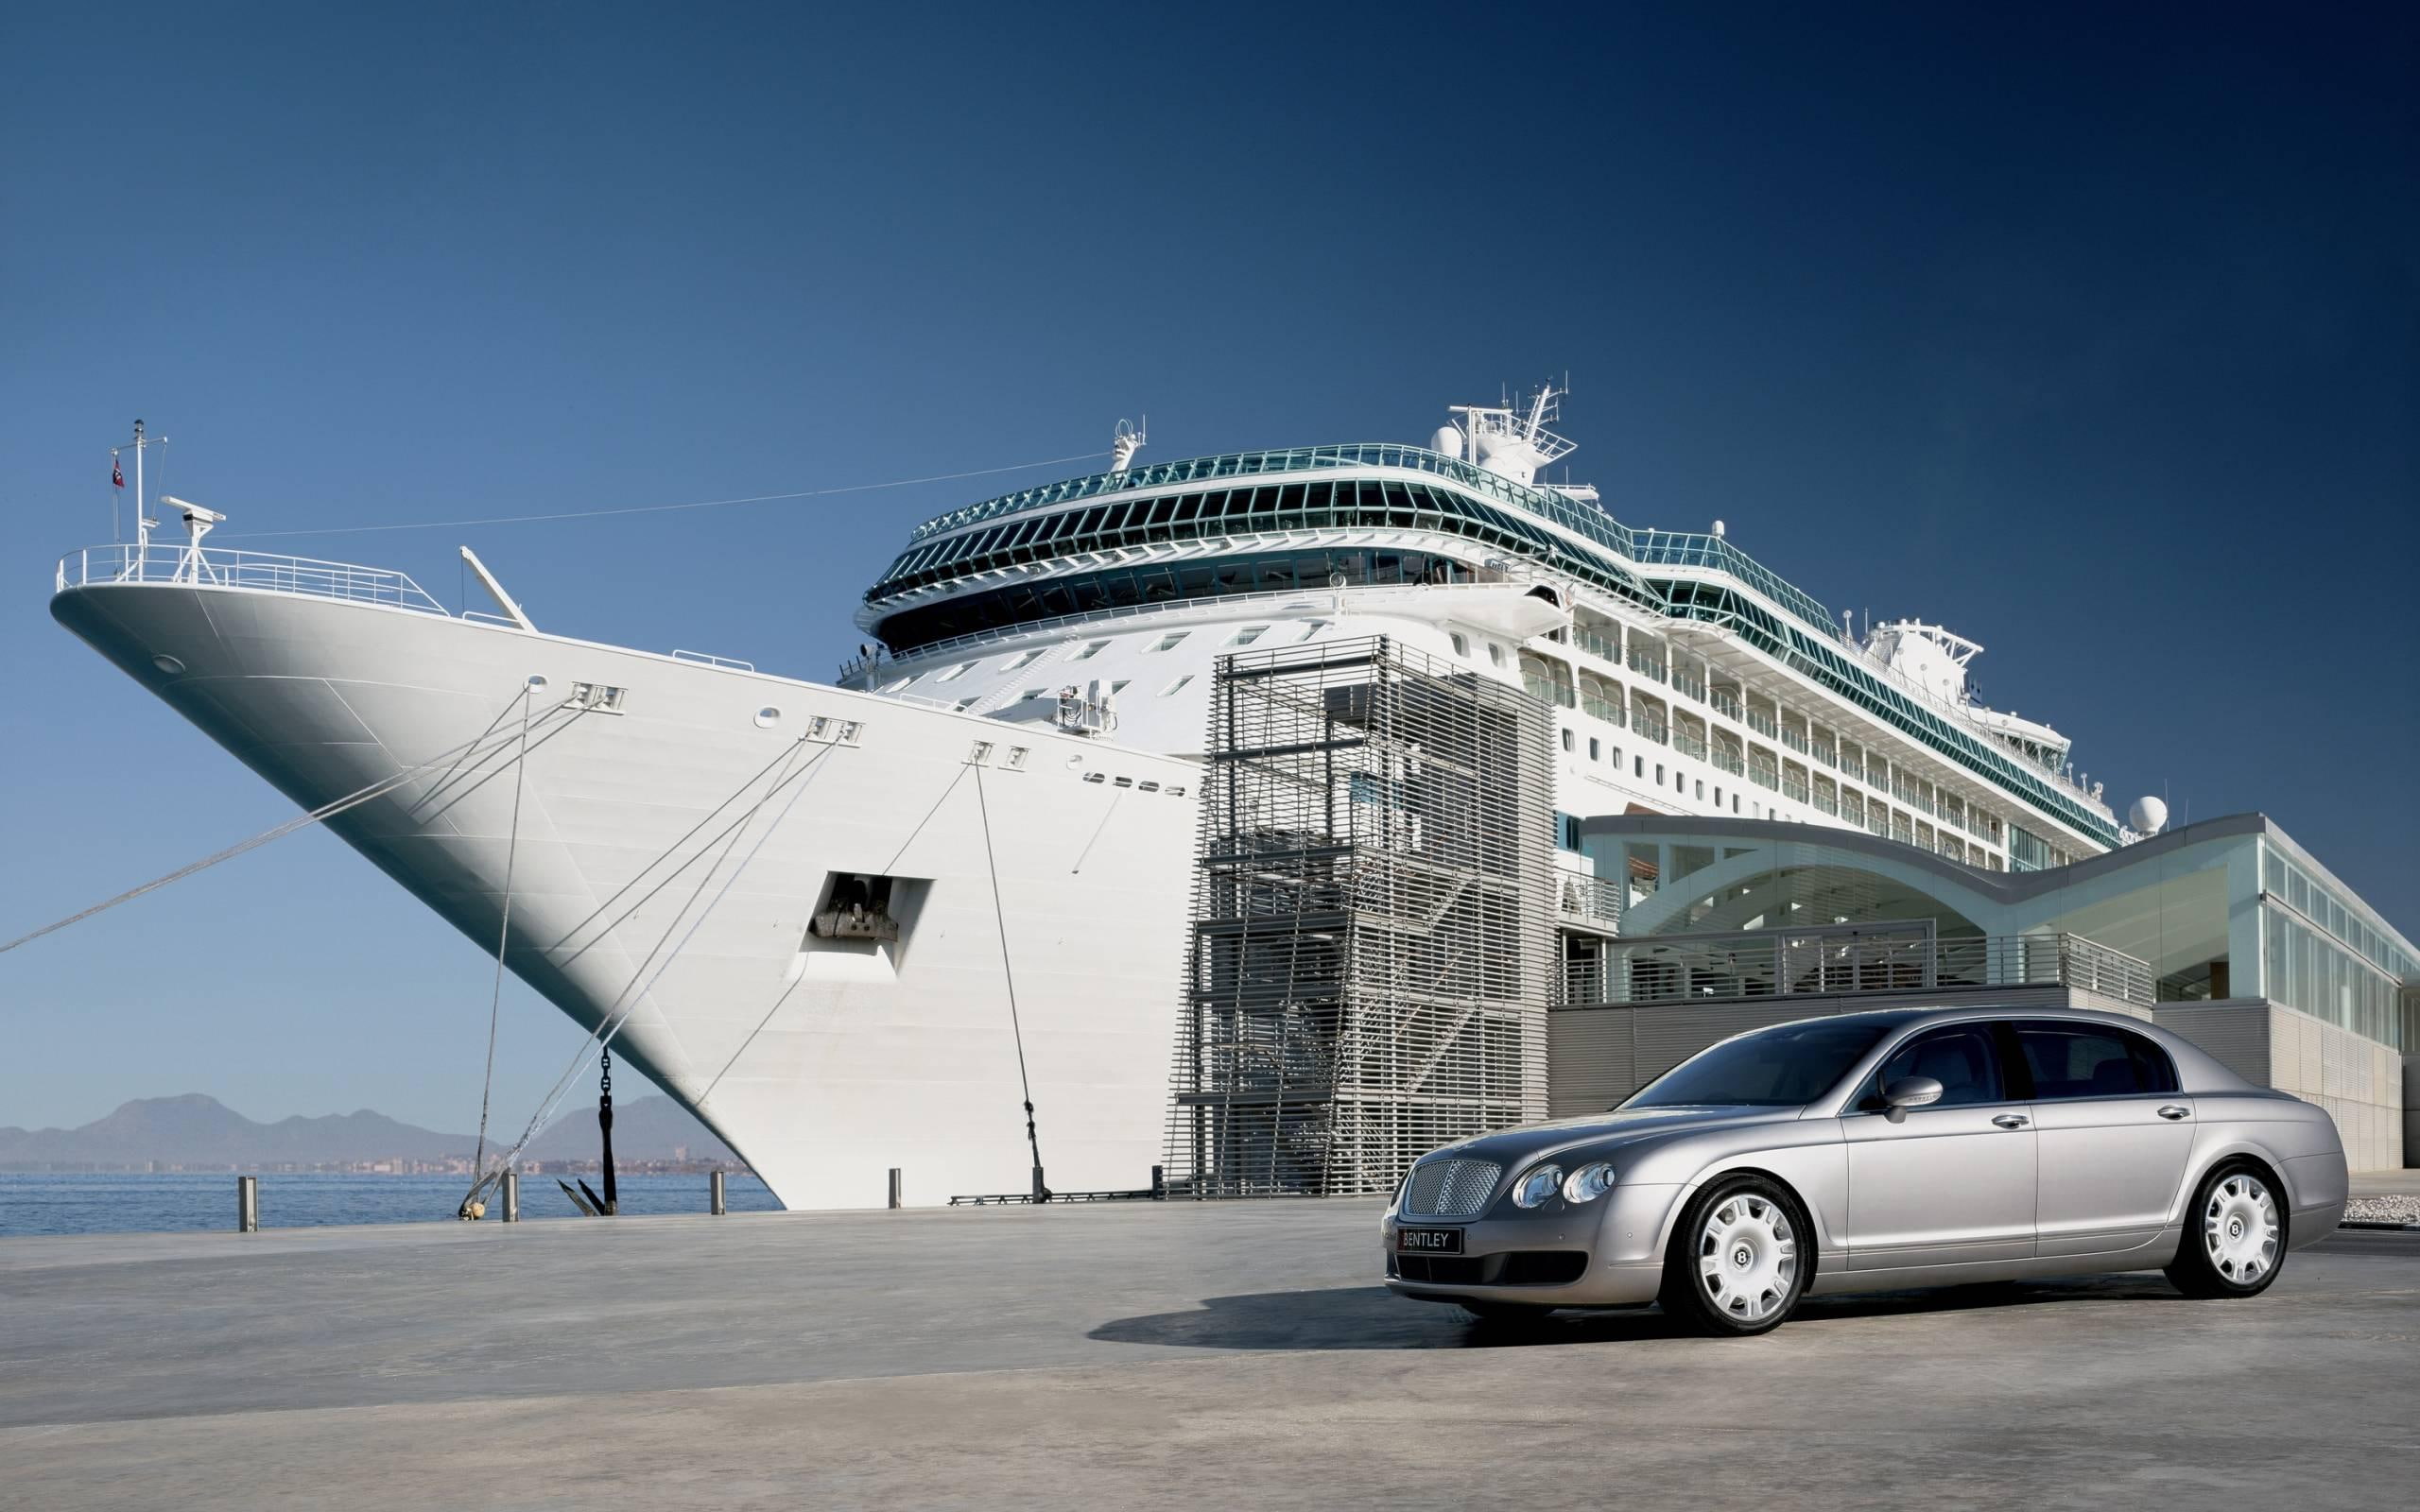 Lifestyles Of The Rich, grey sedan, luxury-liner, boat-and-car